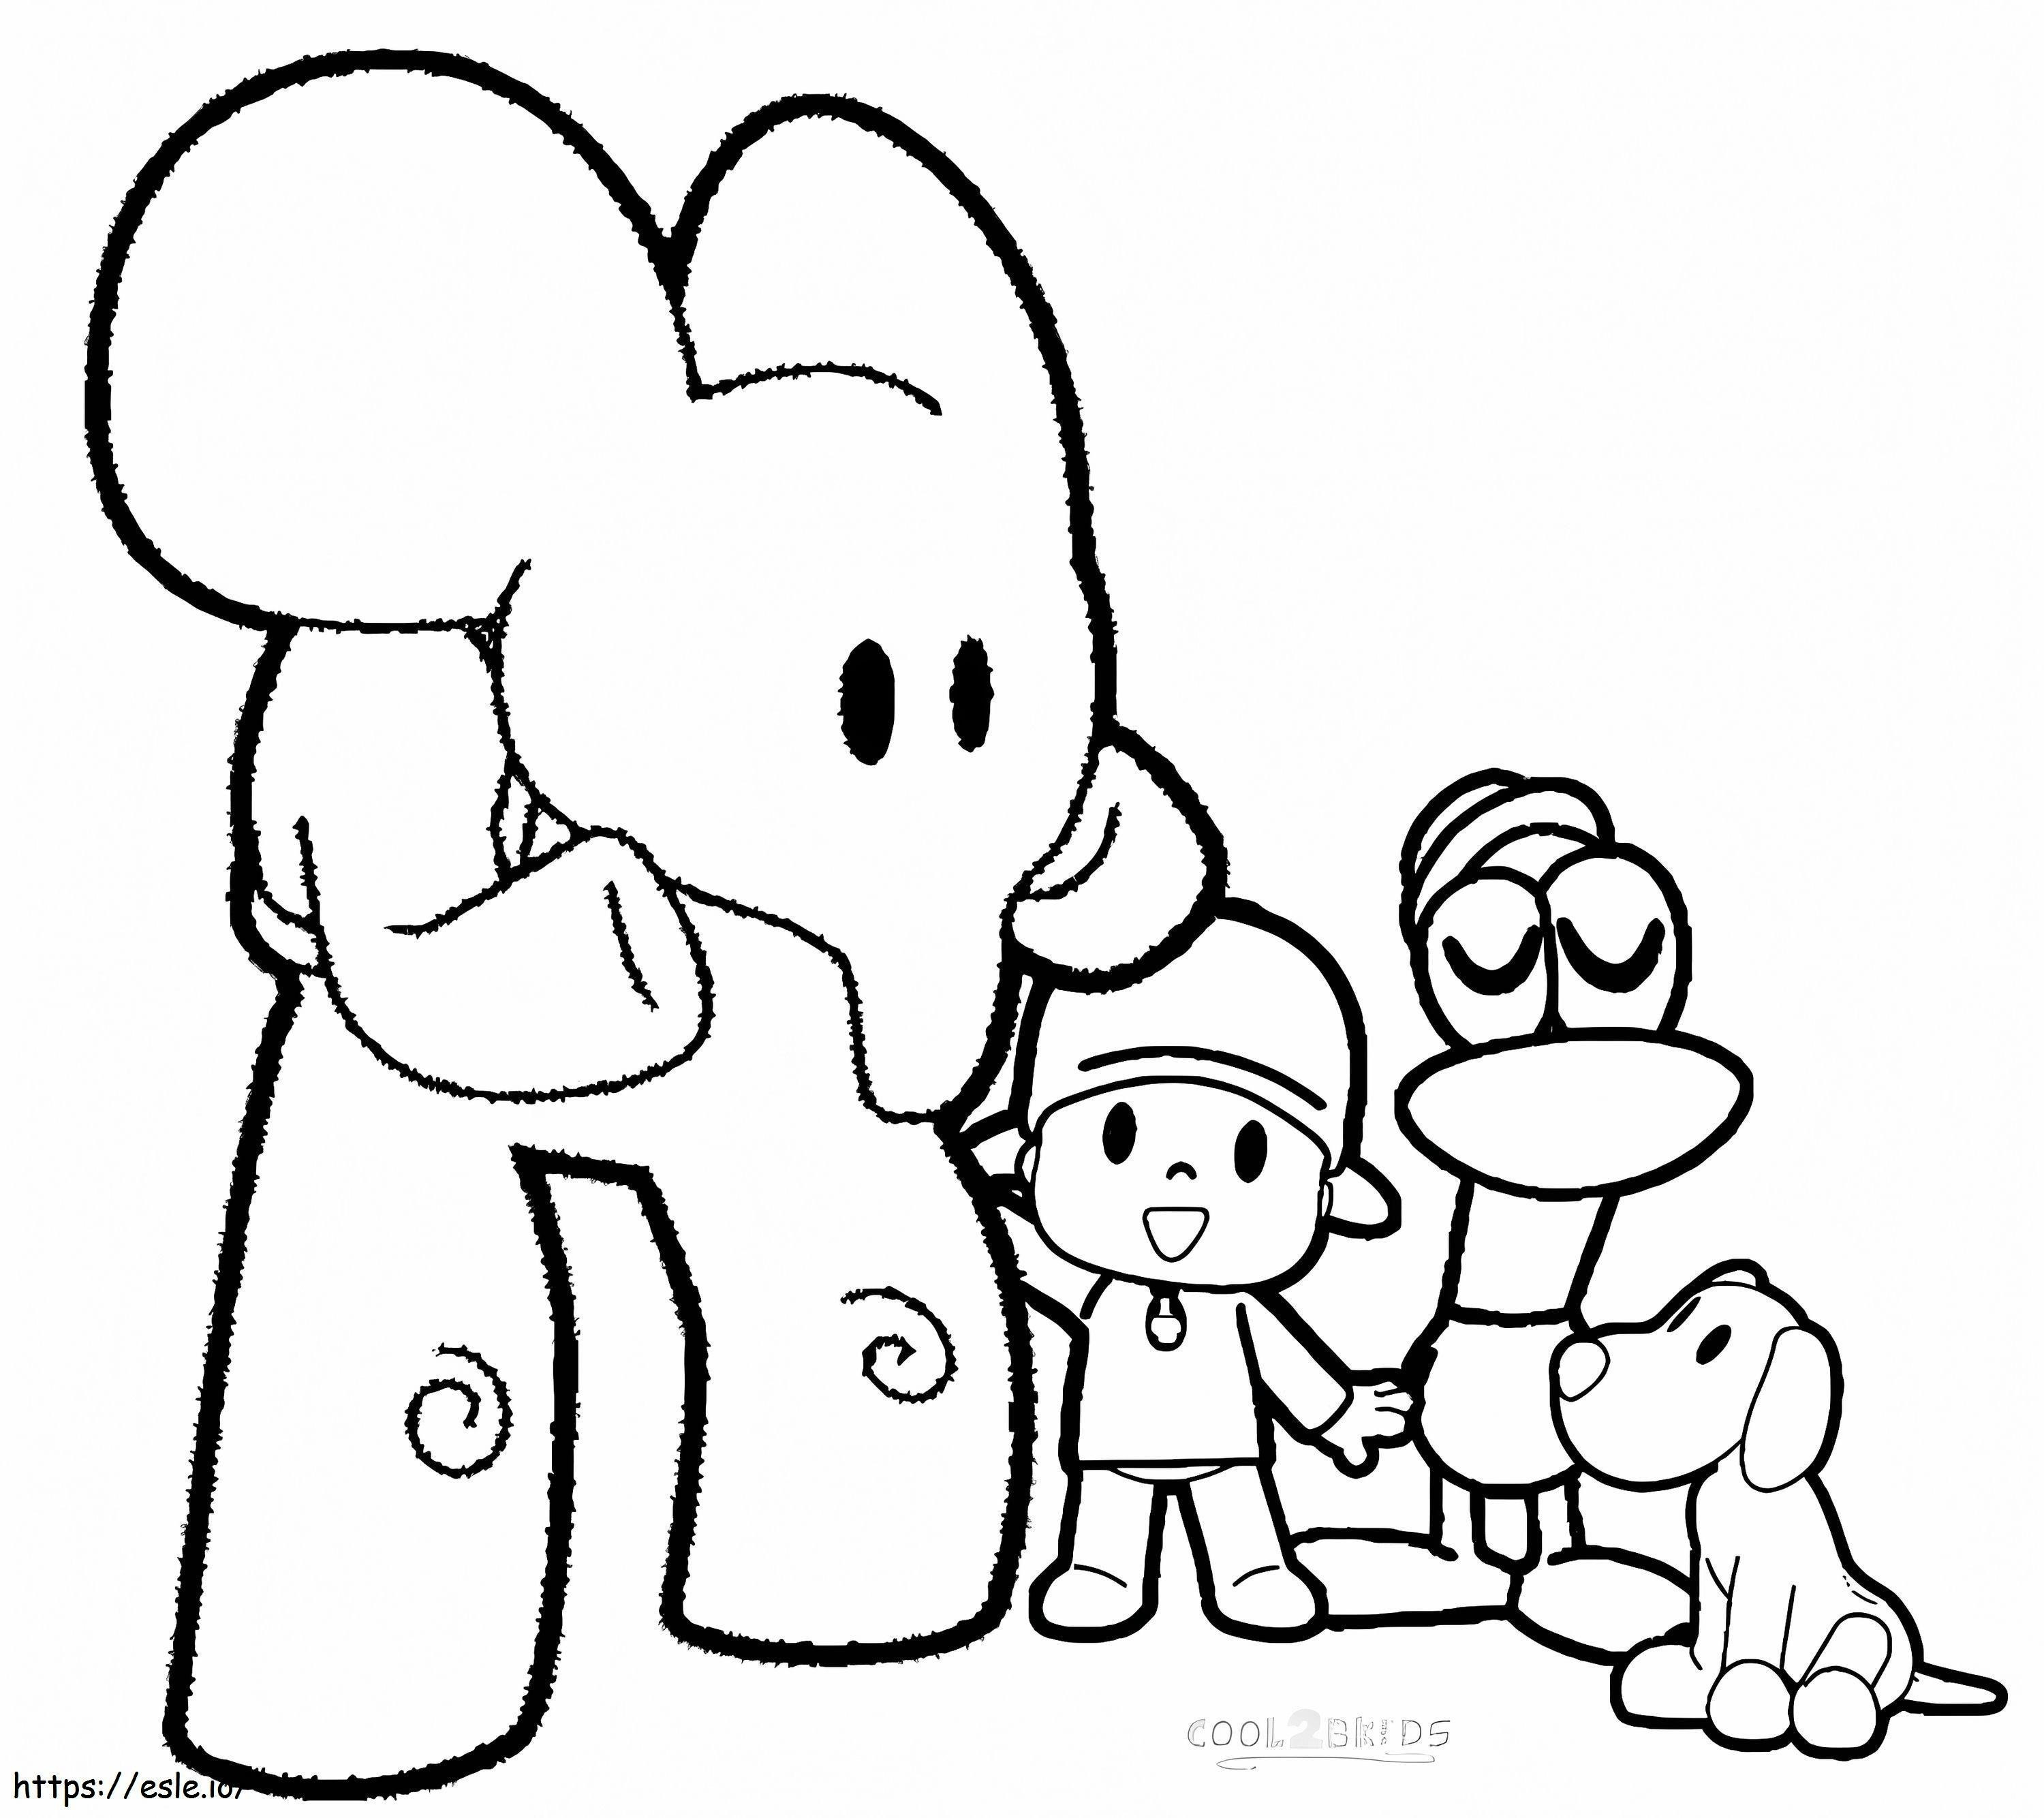 Pocoyo And Friends 3 coloring page